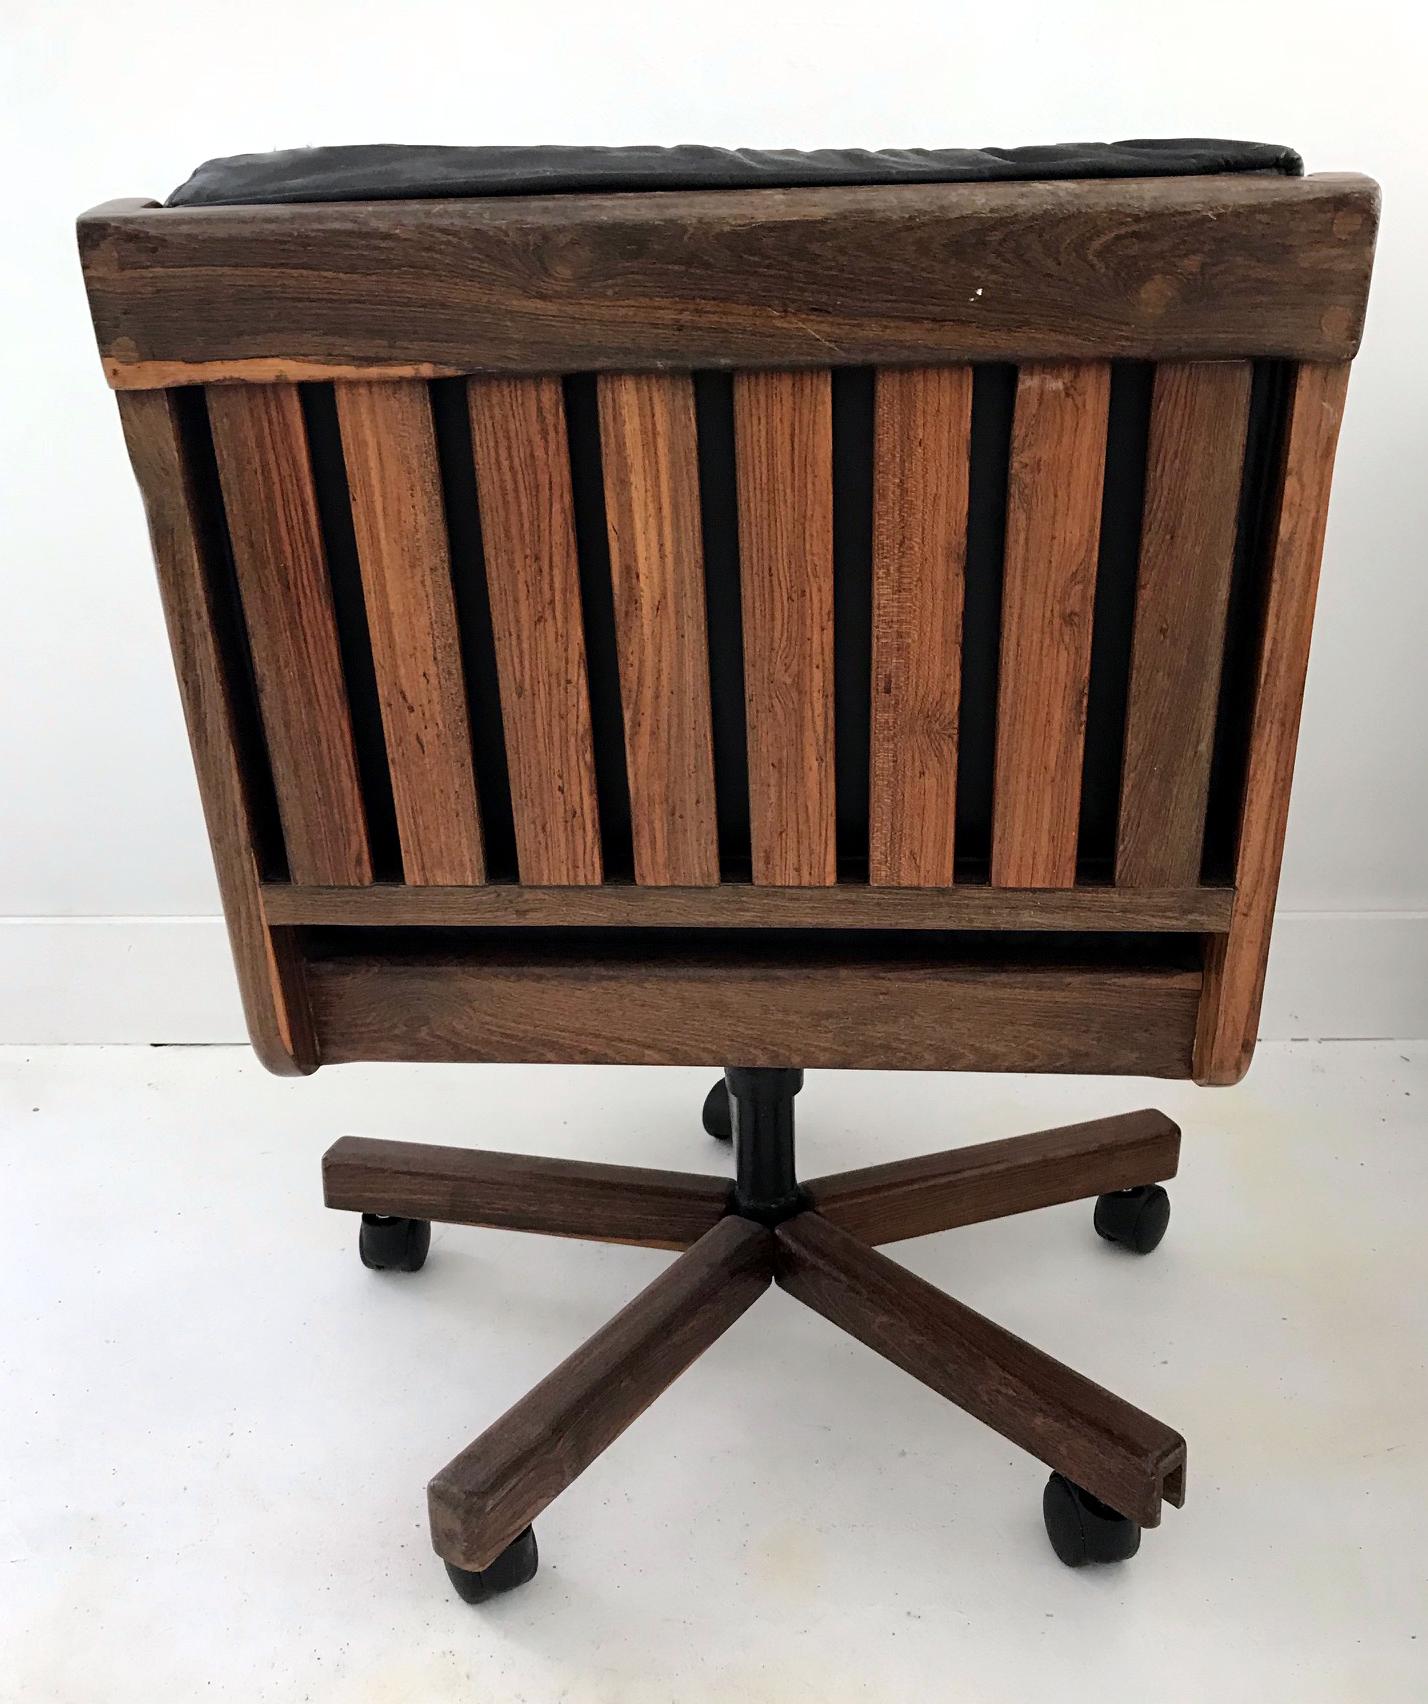 A solid cocobolo wood chair made for desk task by Don S. Shoemaker circa 1970s in Mexico. The chair has padded arm with leather and loos leather seat and back cushions. Subtle design with organic form highlights the beauty that can be found in